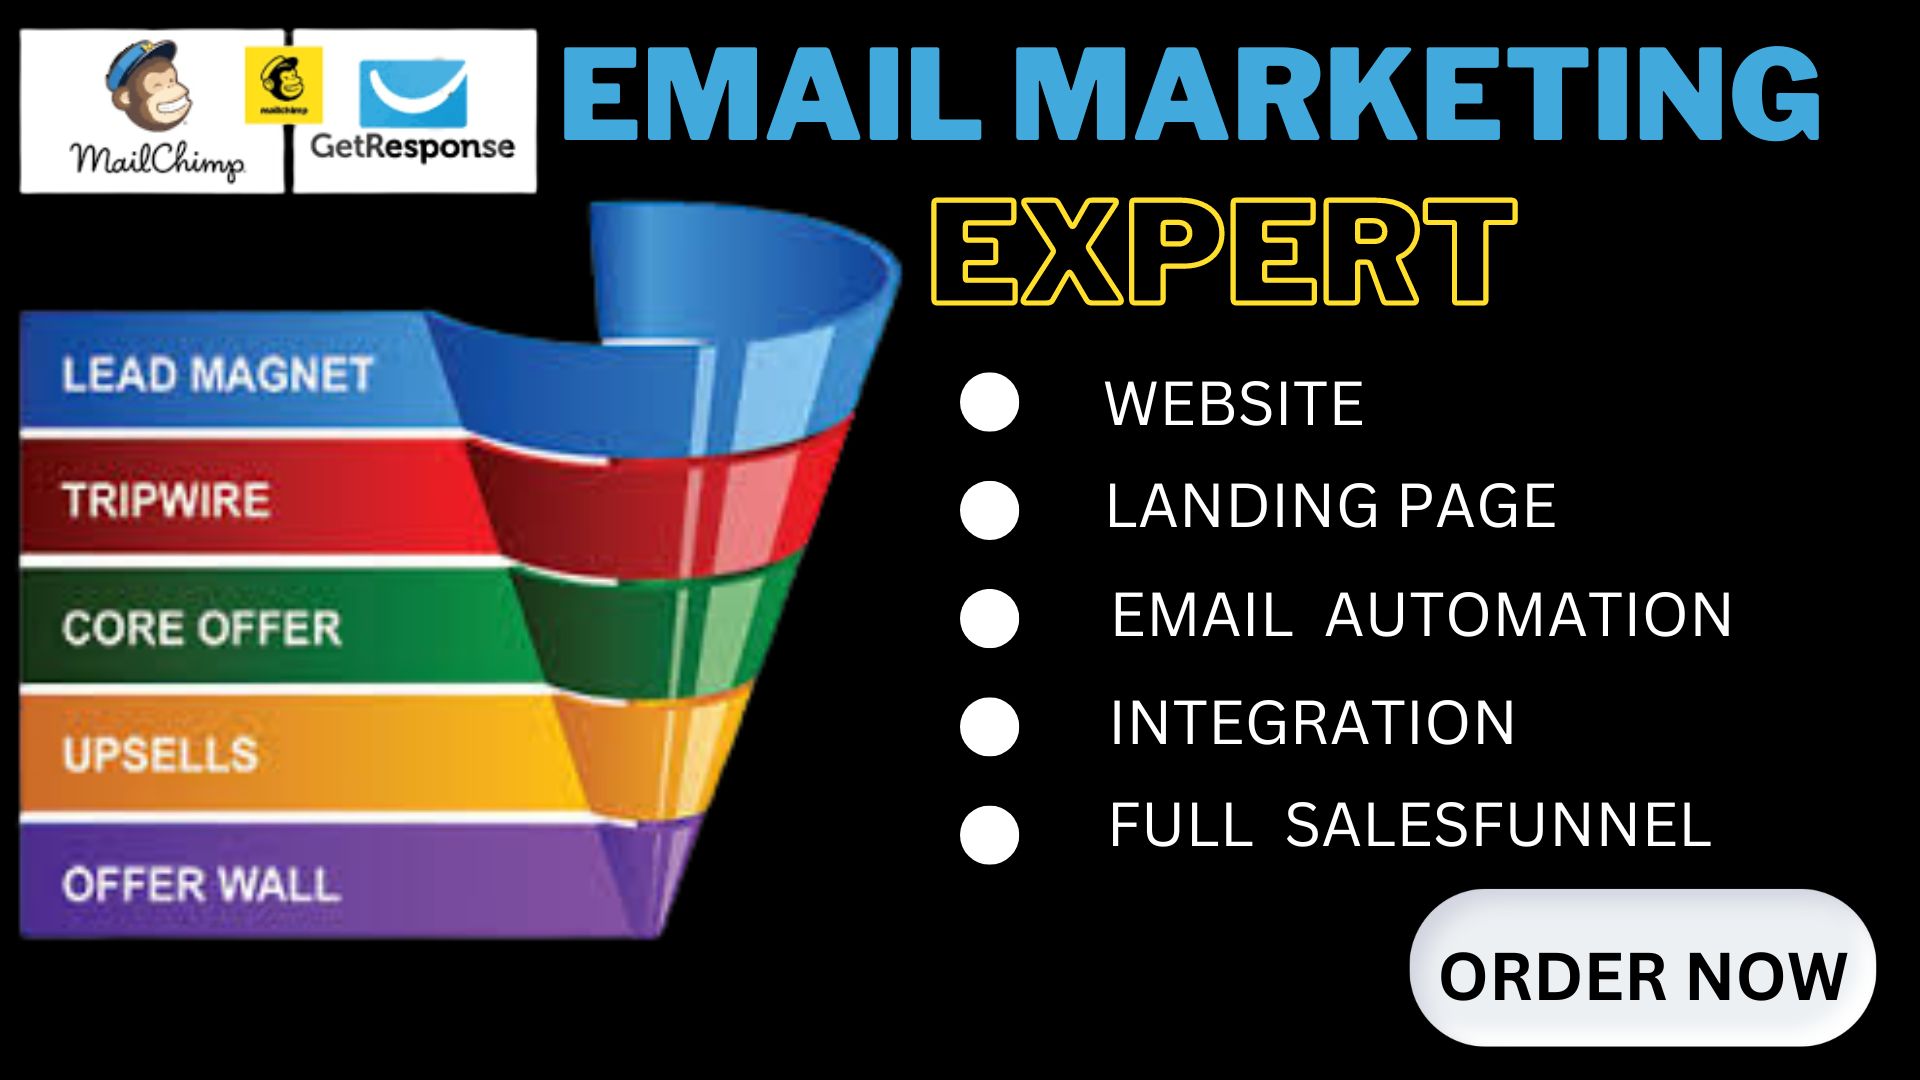 I will setup getresponse landing page, salesfunnel, mailchimp, lead page and automation, FiverrBox